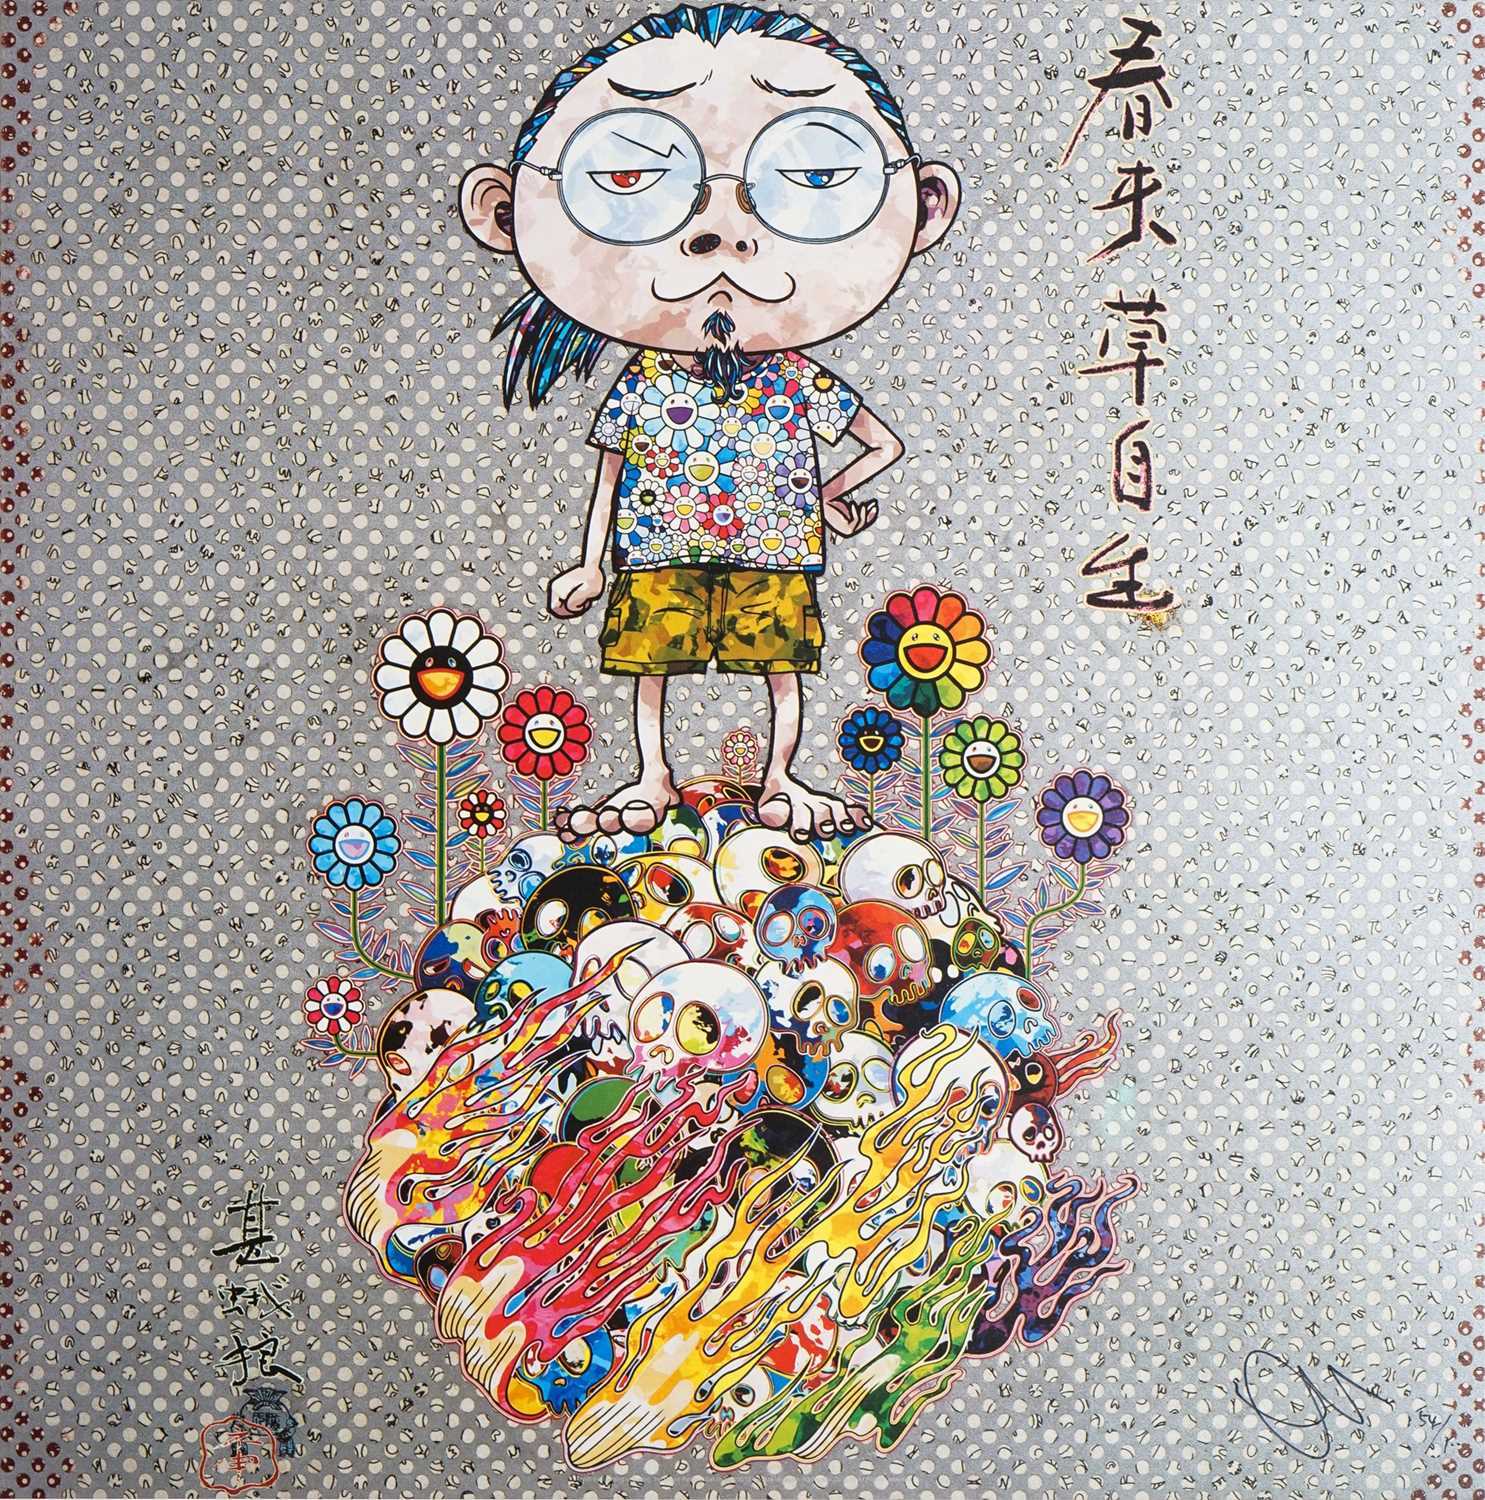 Lot 72 - Takashi Murakami (Japanese 1962-), 'With the Coming of Spring, the Grass Returns Naturally', 2013